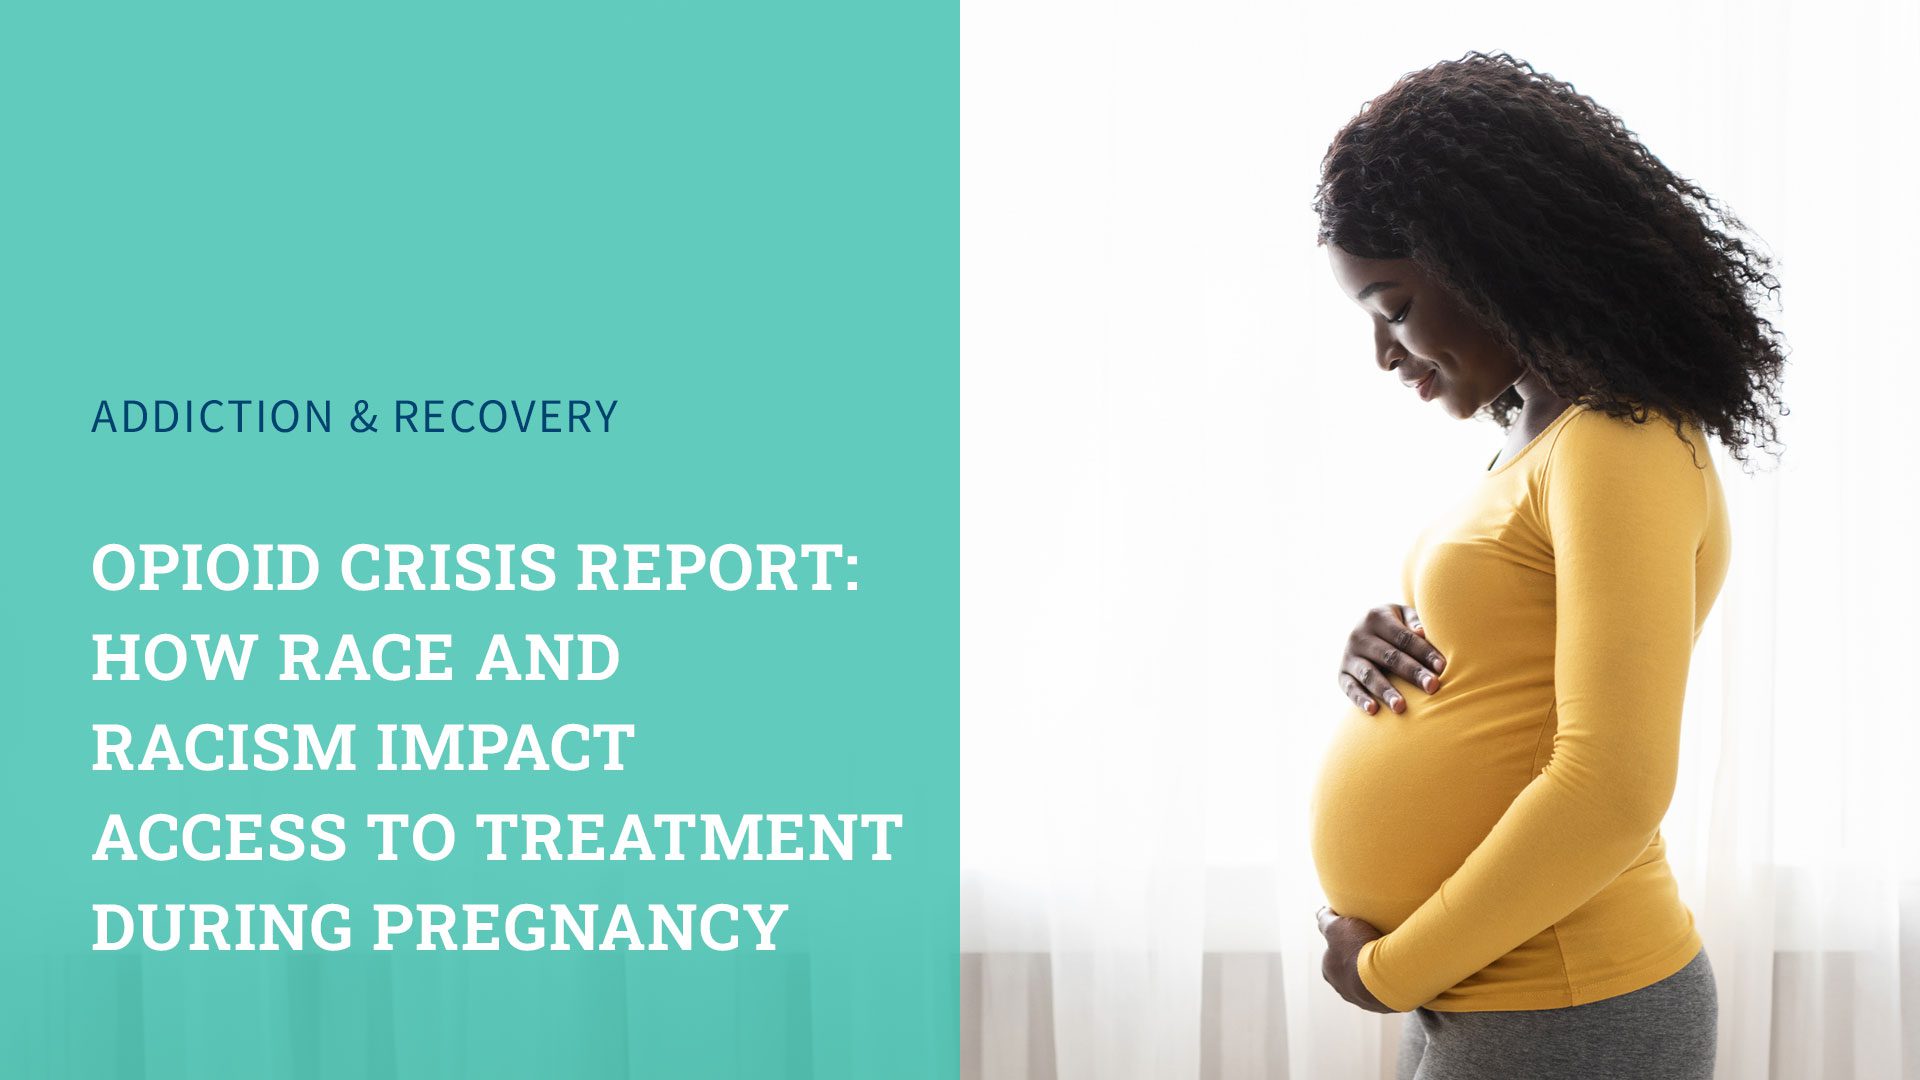 How Race and Racism Impact Treatment for Addiction During Pregnancy